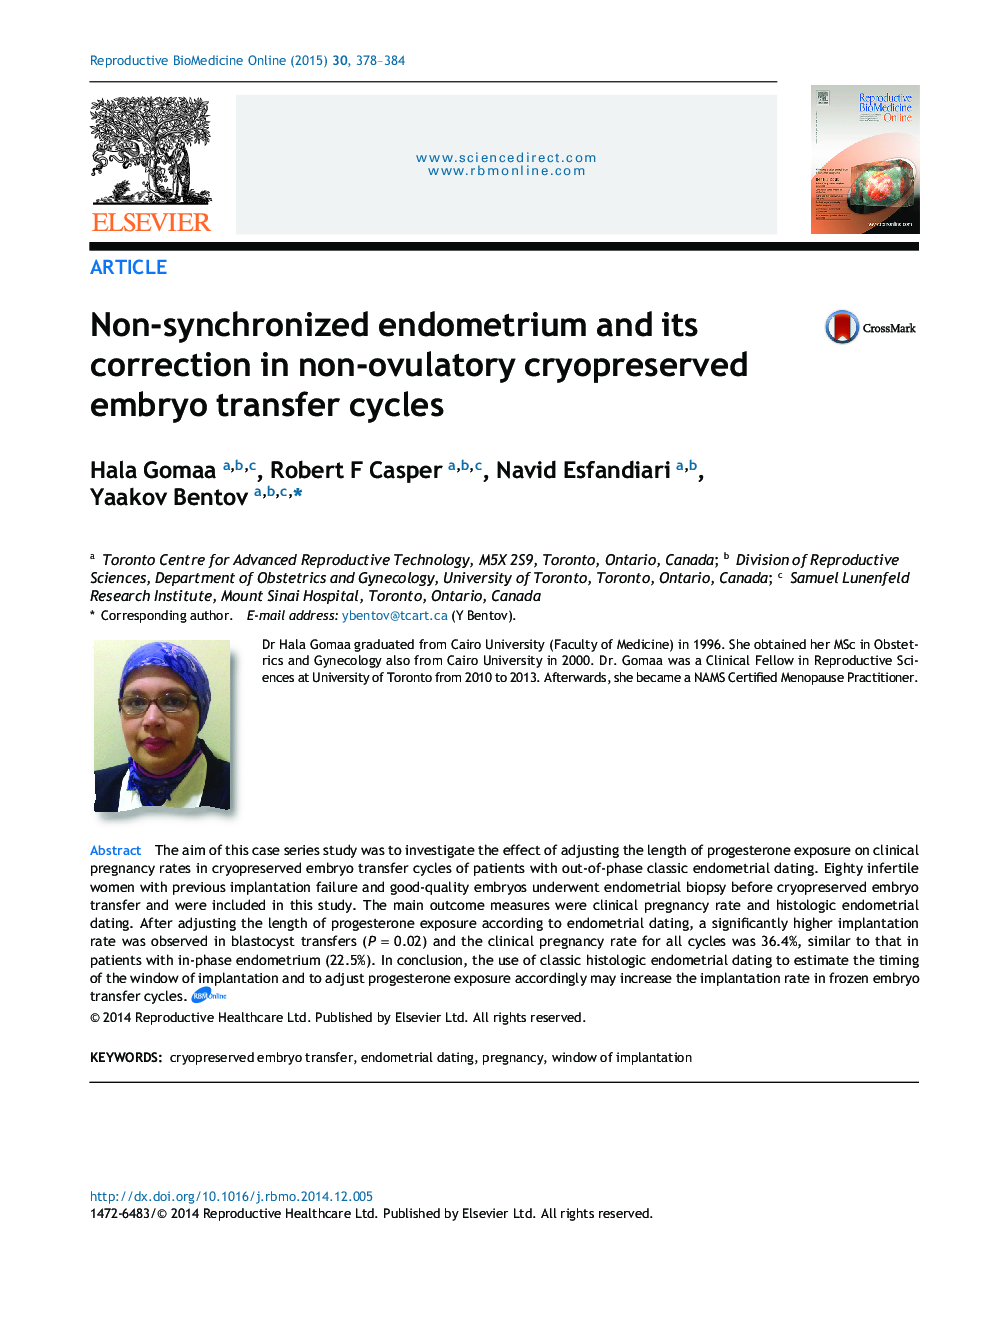 Non-synchronized endometrium and its correction in non-ovulatory cryopreserved embryo transfer cycles